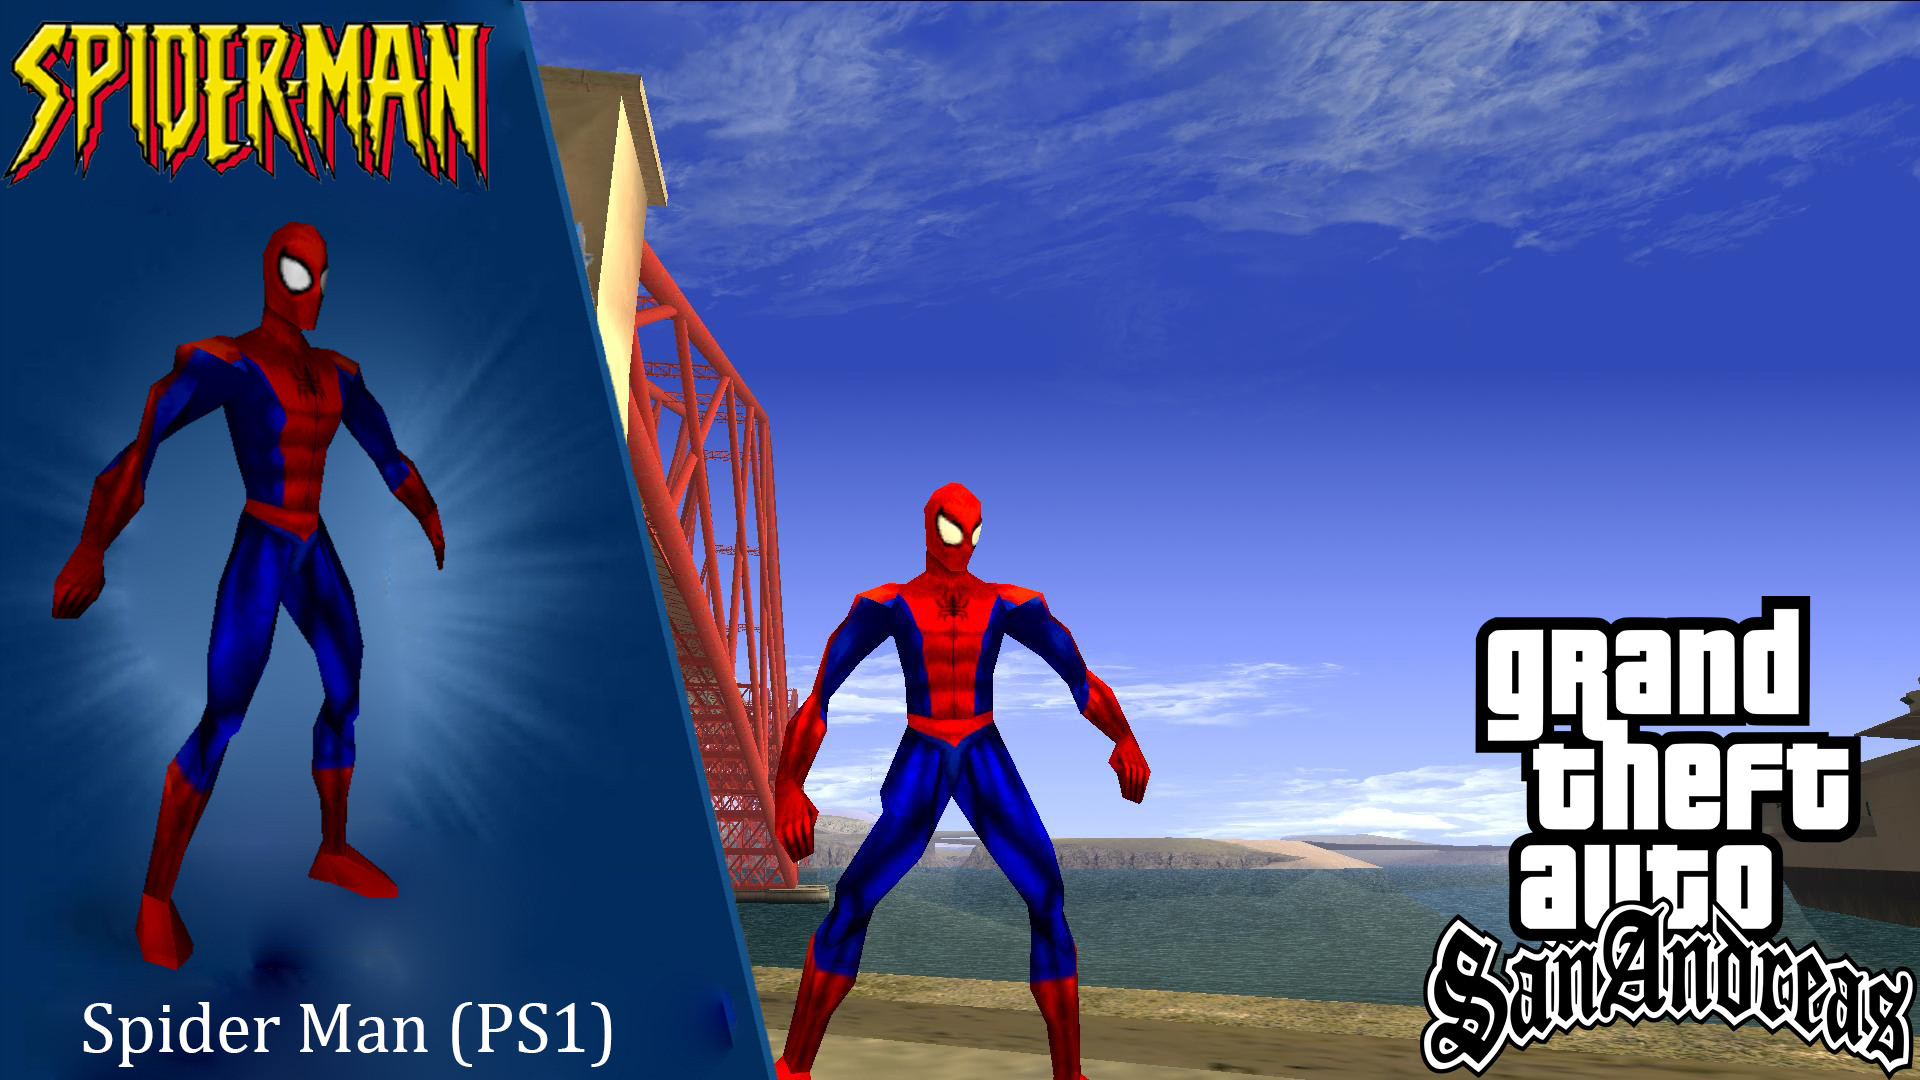 Spider Man (PS1) [Grand Theft Auto: San Andreas] [Mods]